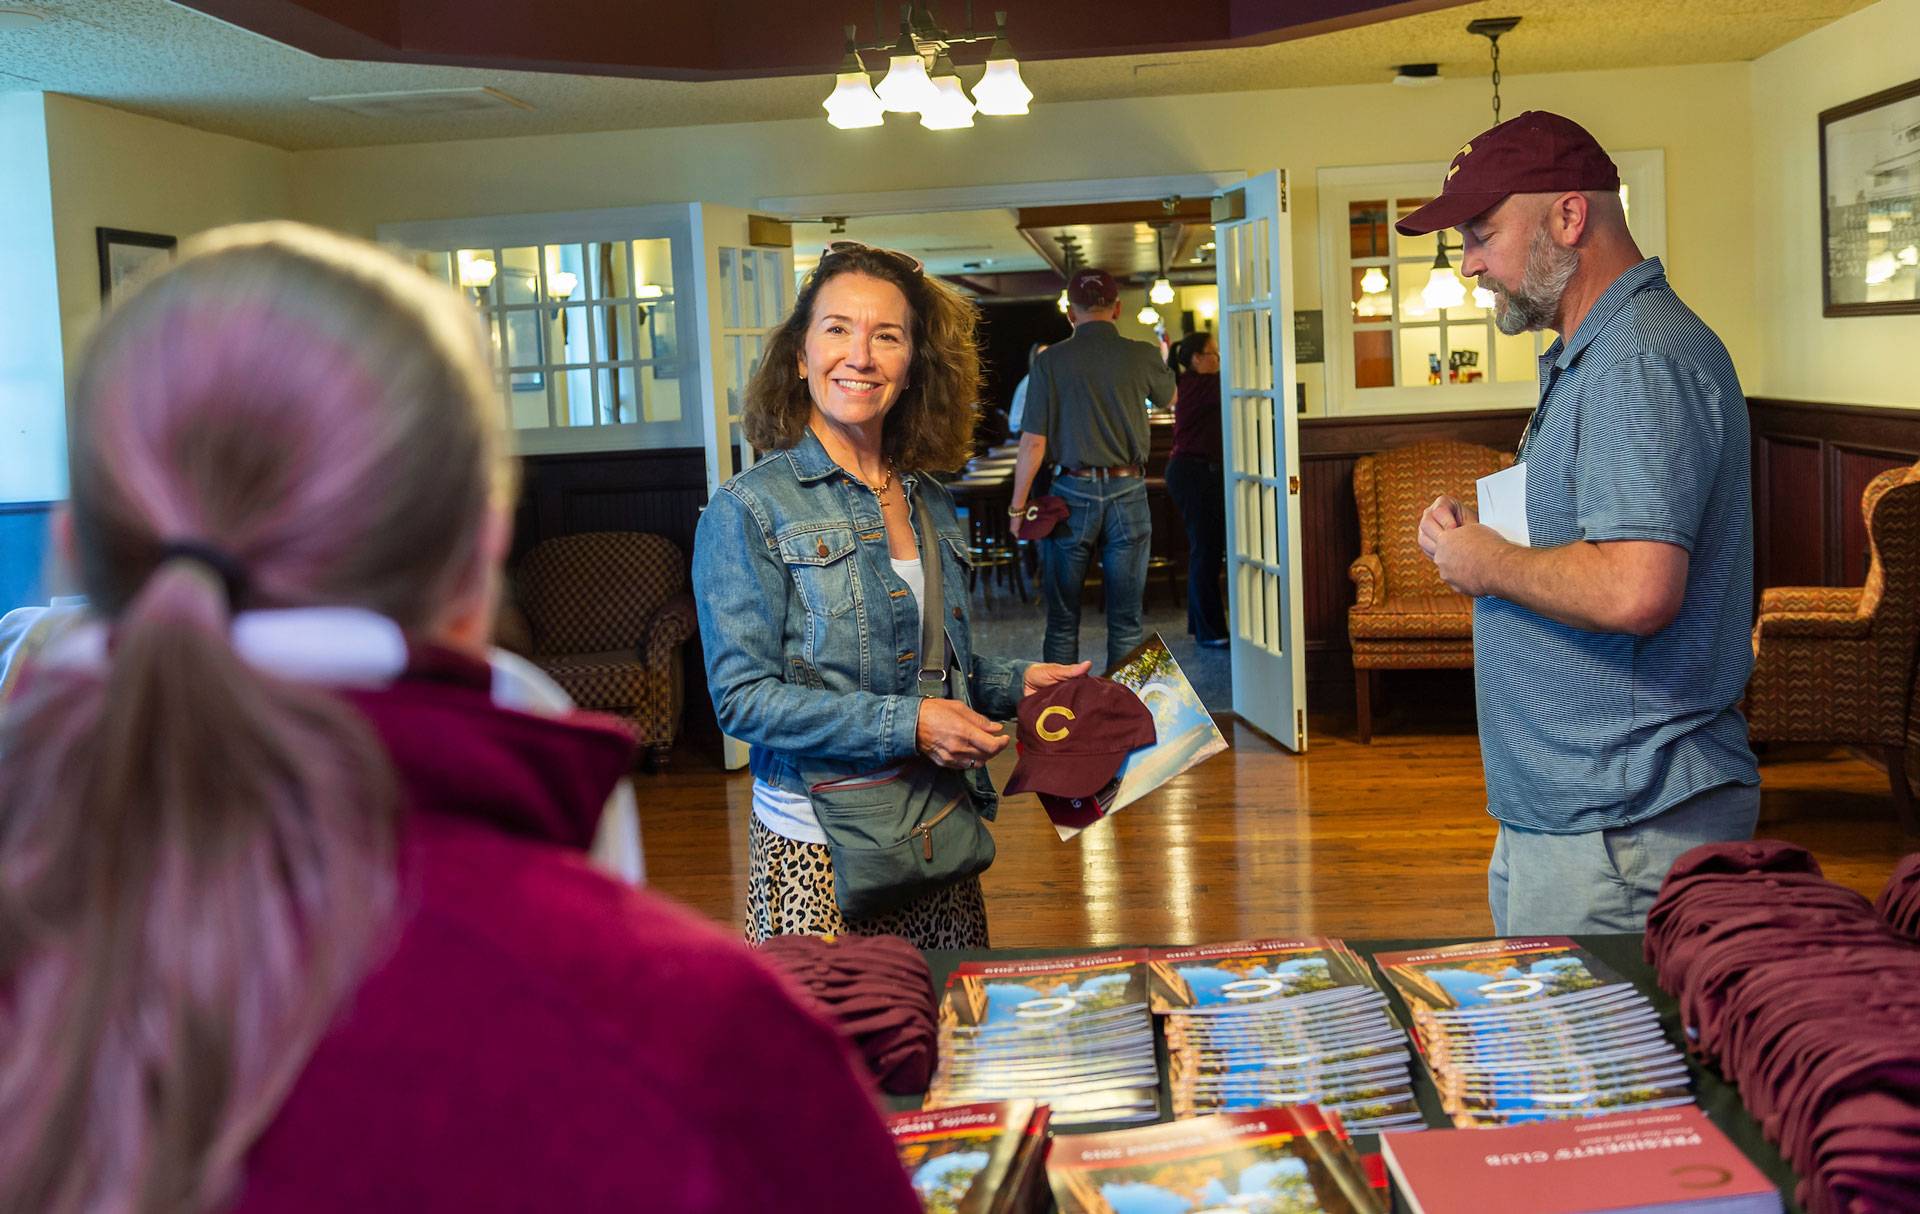 A mom in a jean jacket and dad in a Colgate baseball hat ick up a schedule at the welcome center table